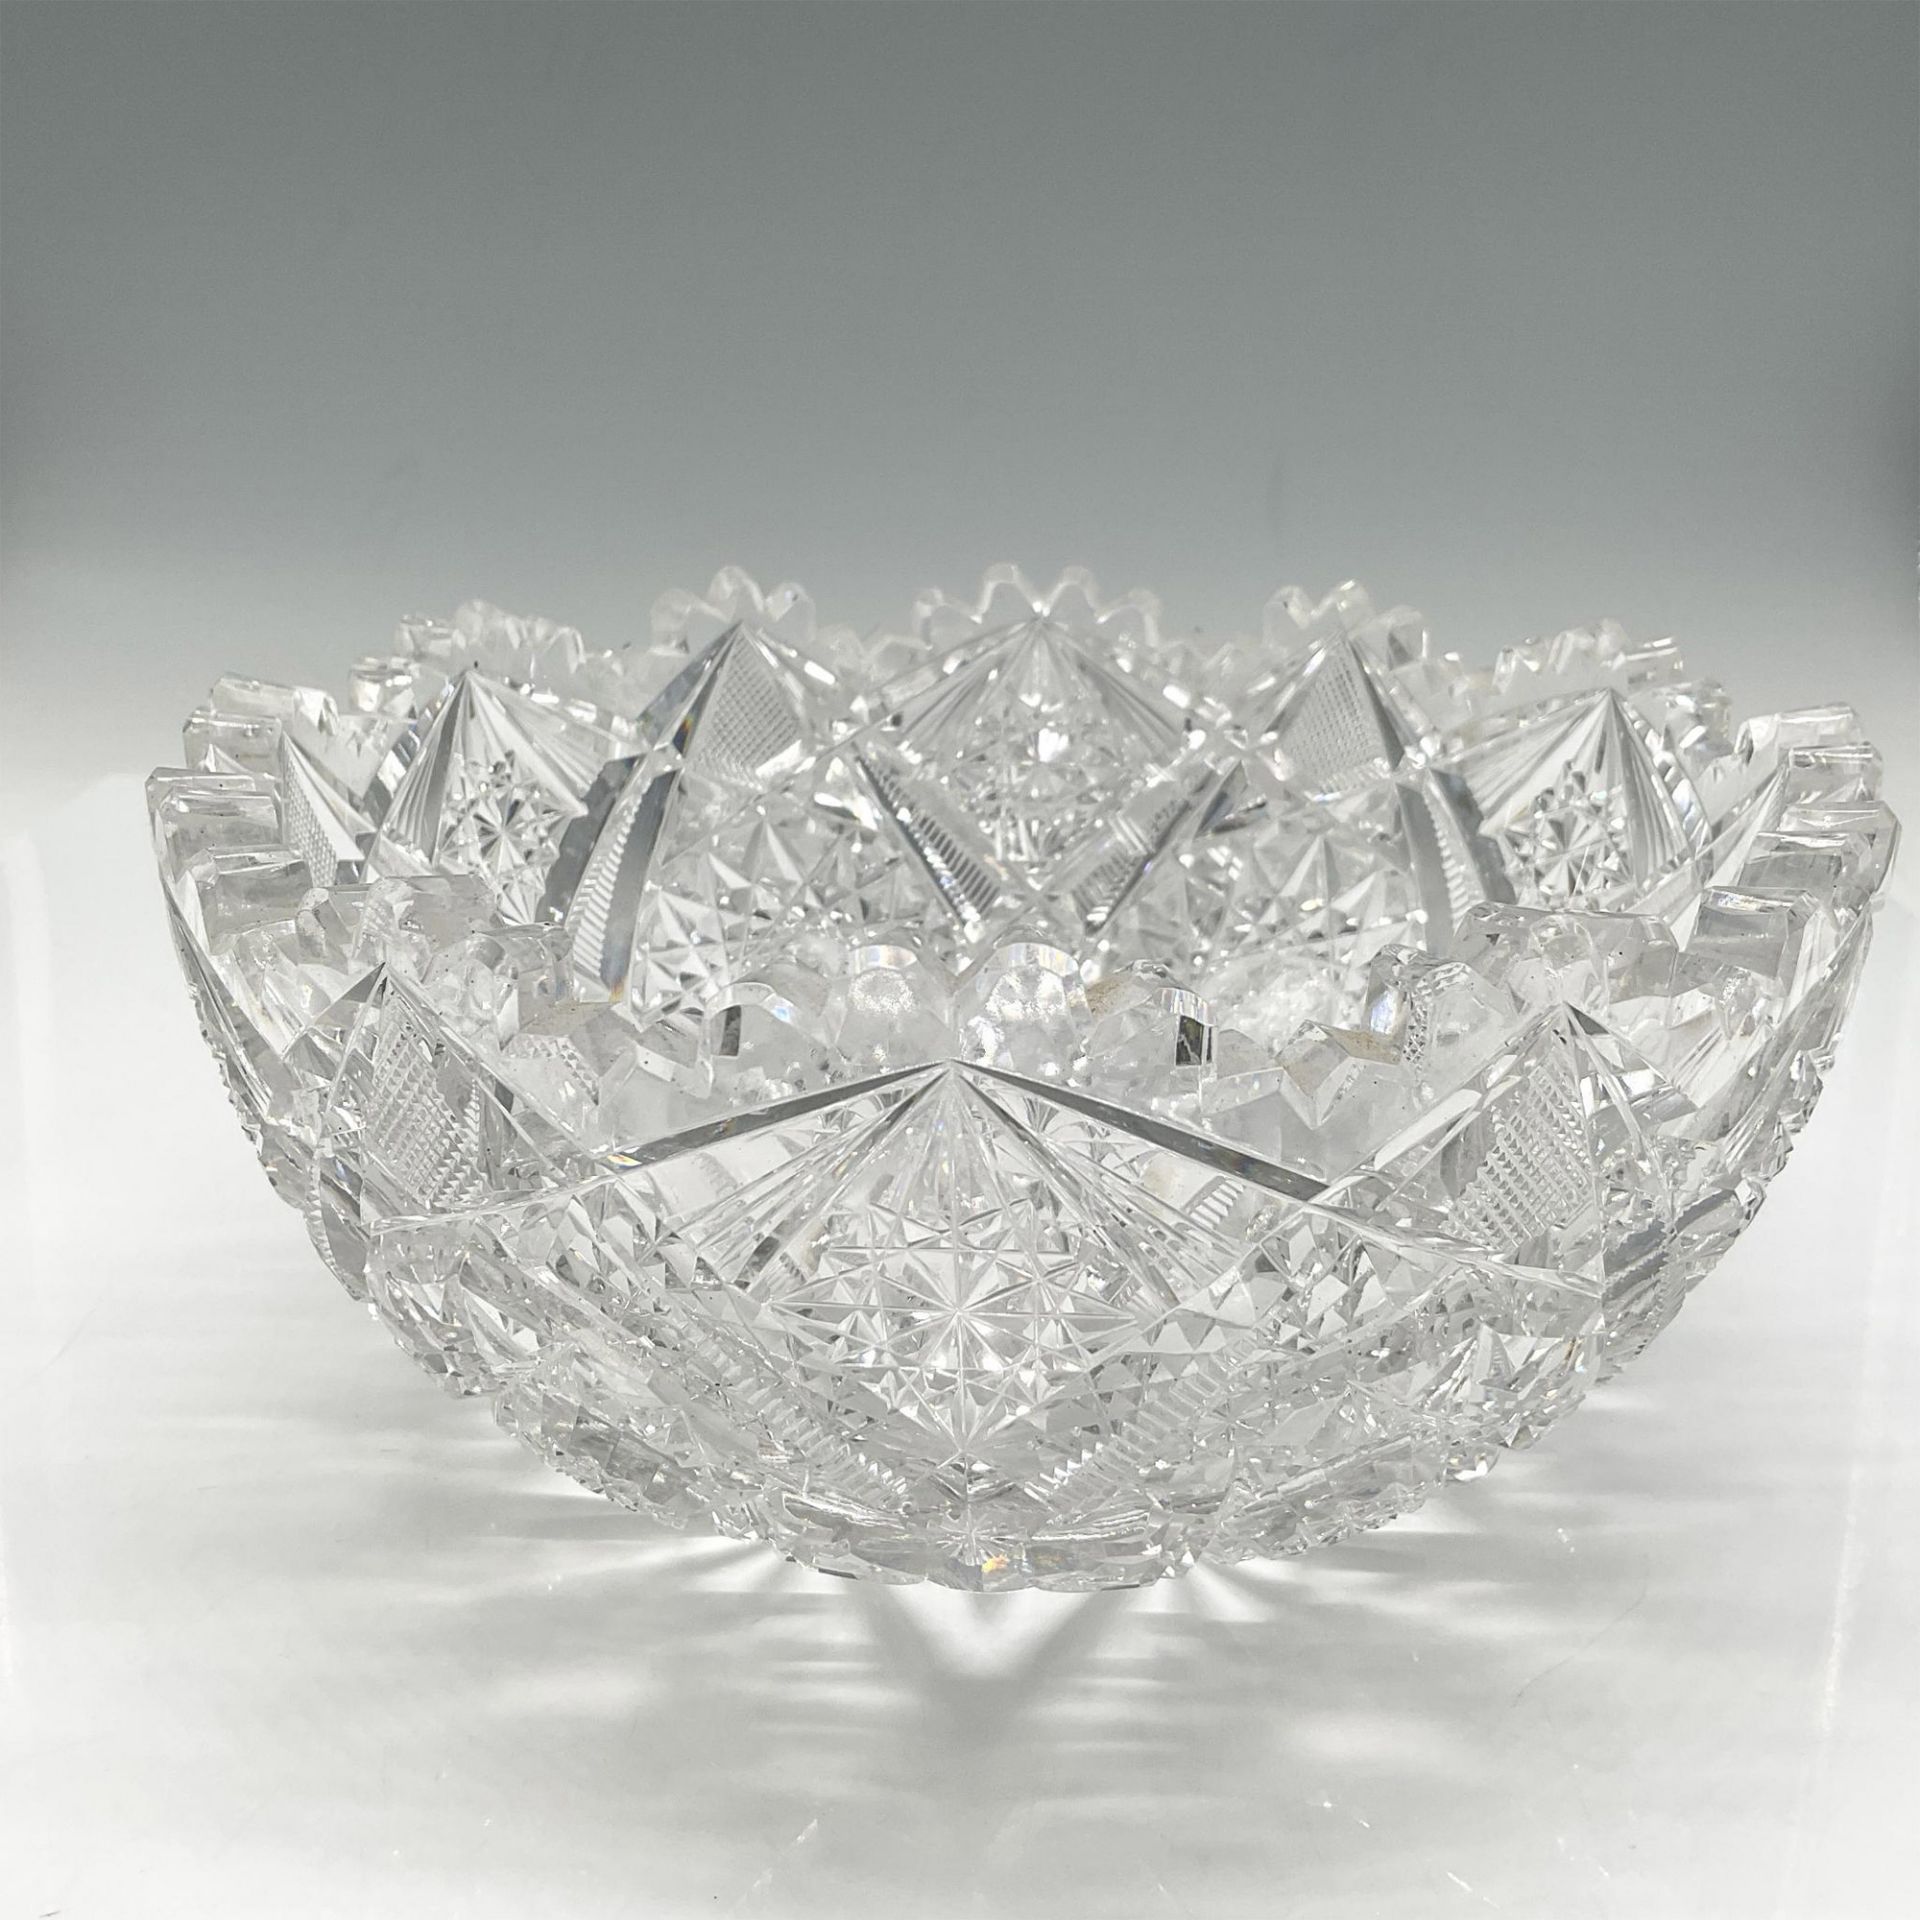 2pc American Brilliant Cut Glass Bowl and Dish - Image 3 of 4